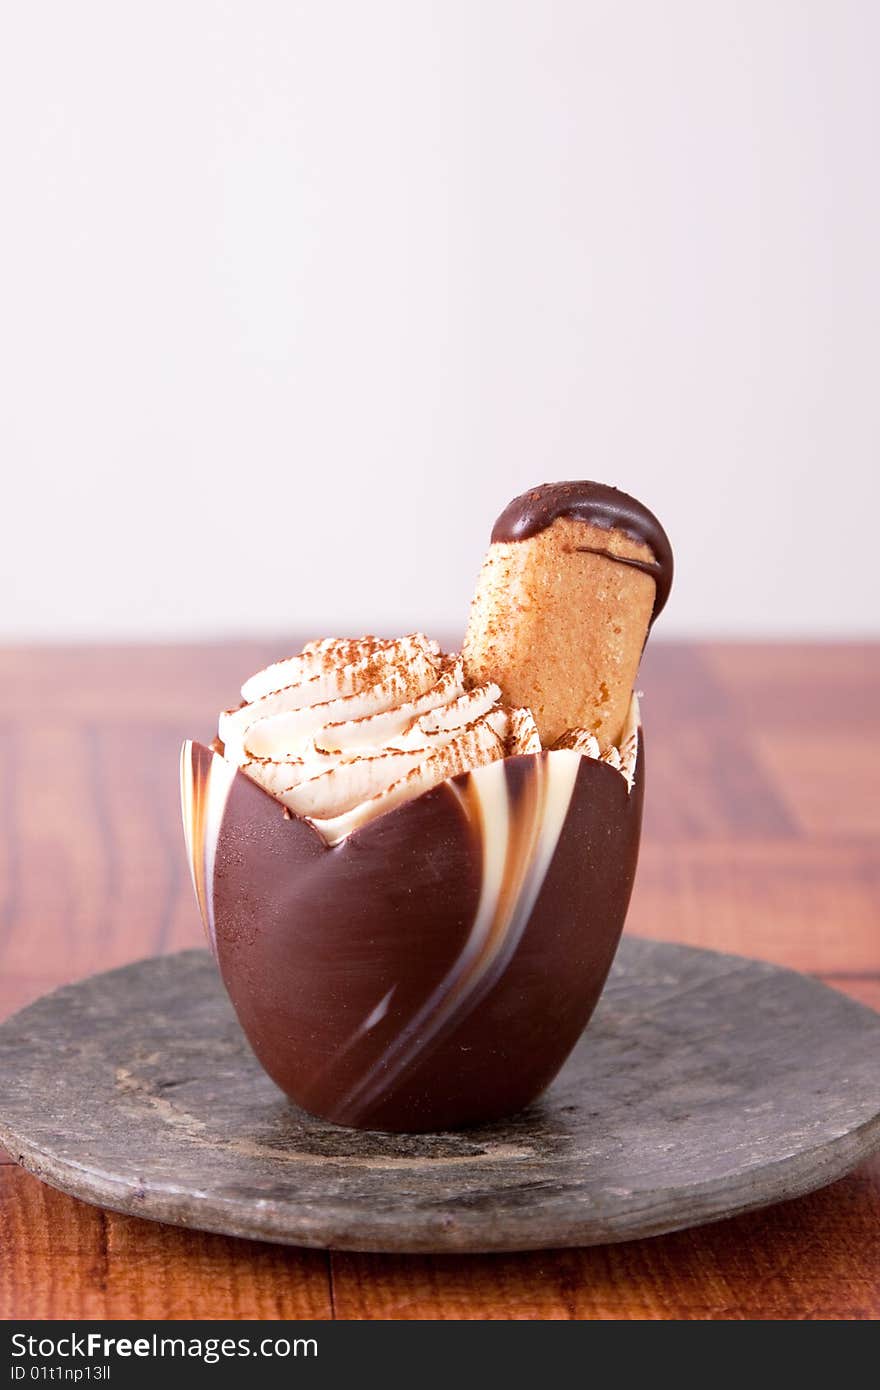 Rich, decadent Tiramisu served in a chocolate cup. Sprinkled with fine cinnamon powder and topped with a lady finger cookie. Rich, decadent Tiramisu served in a chocolate cup. Sprinkled with fine cinnamon powder and topped with a lady finger cookie.